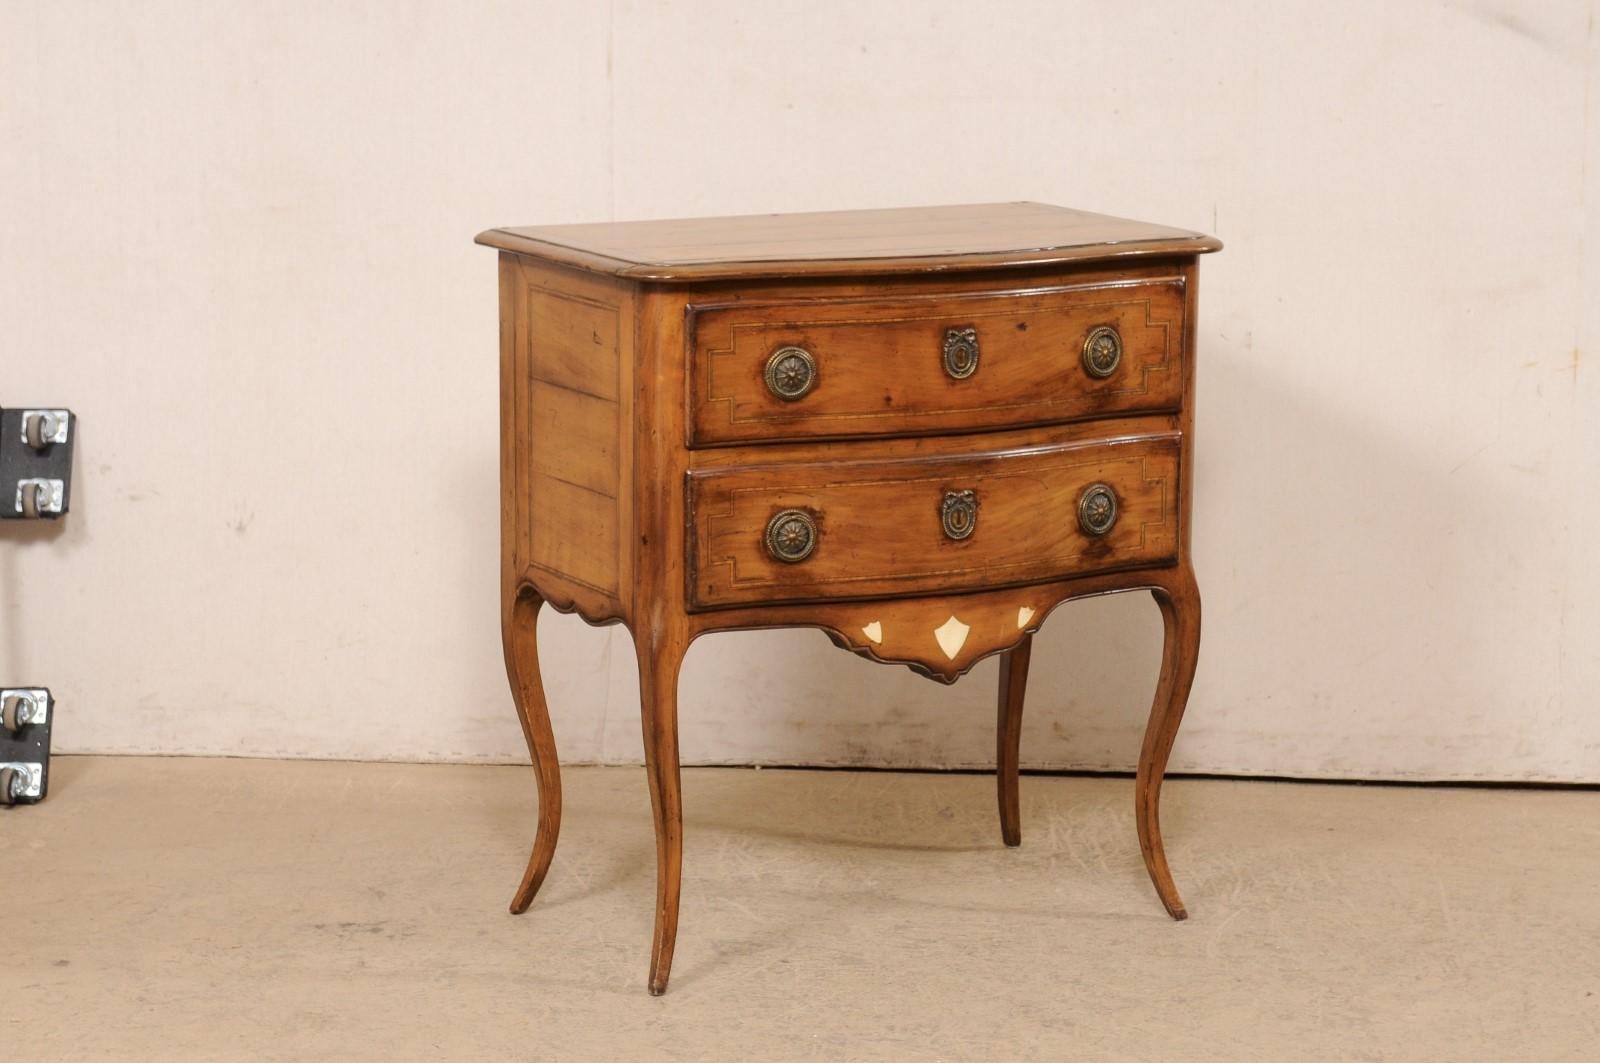 A French Louis XV raised two-drawer commode, with its original hardware, from the early 19th century. This antique wooden chest from France features a subtly curved serpentine top and front facade, and case which houses two drawers, a nicely carved